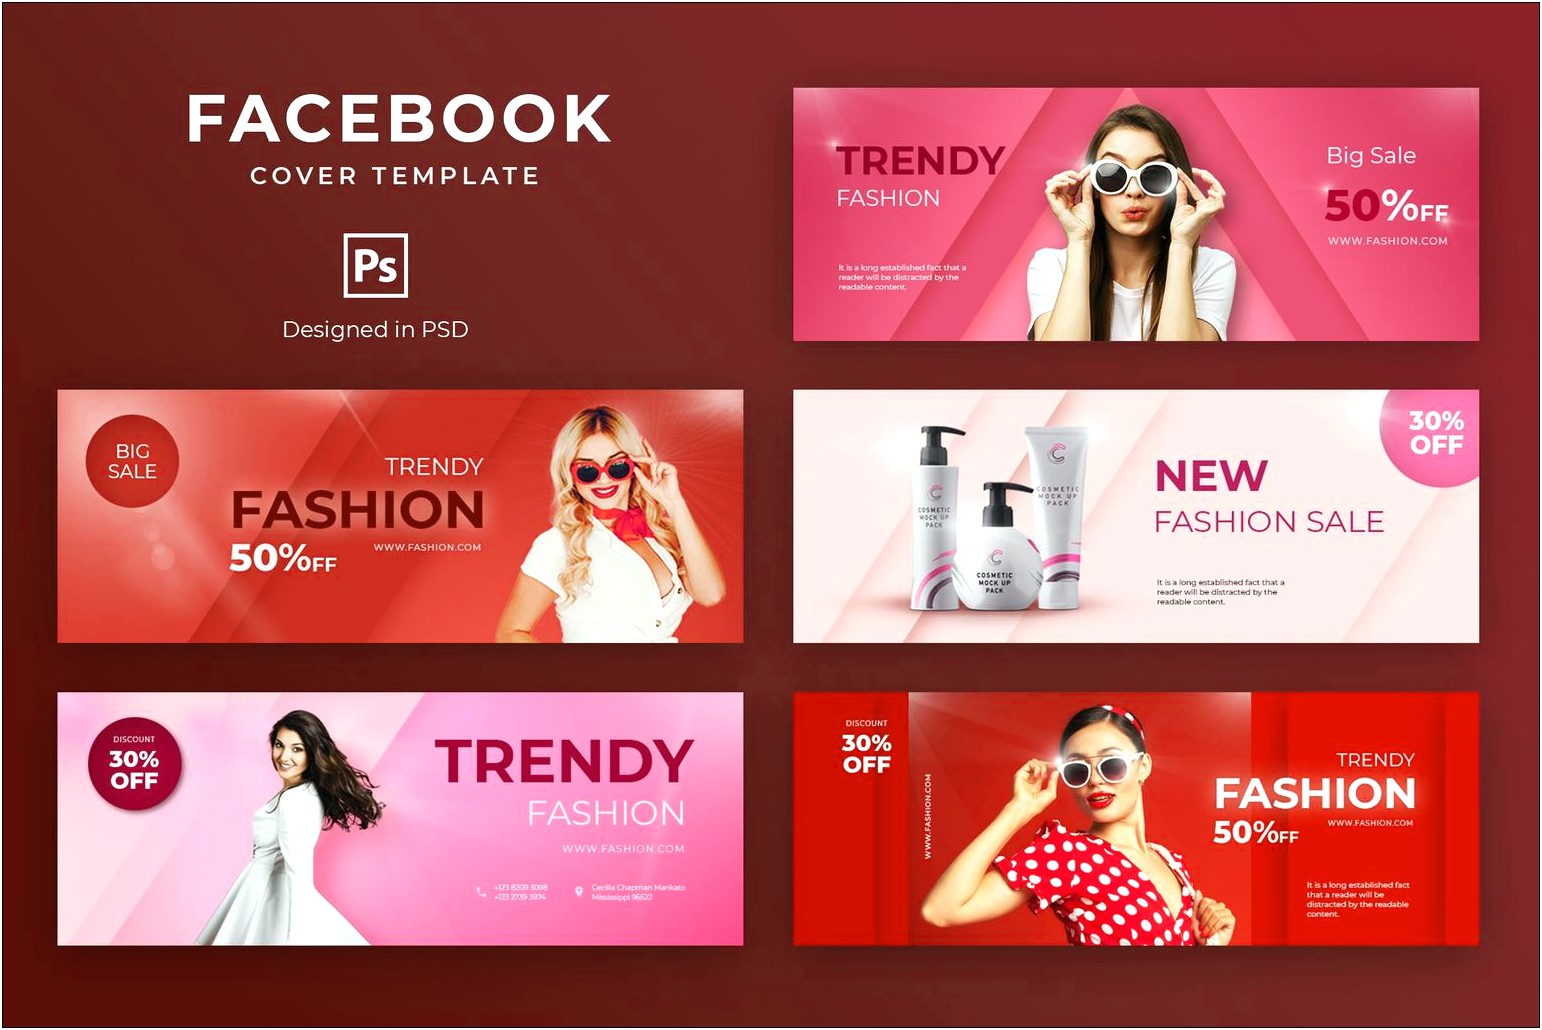 Free Adobe Photoshop Elements Templates For Facebook Cover